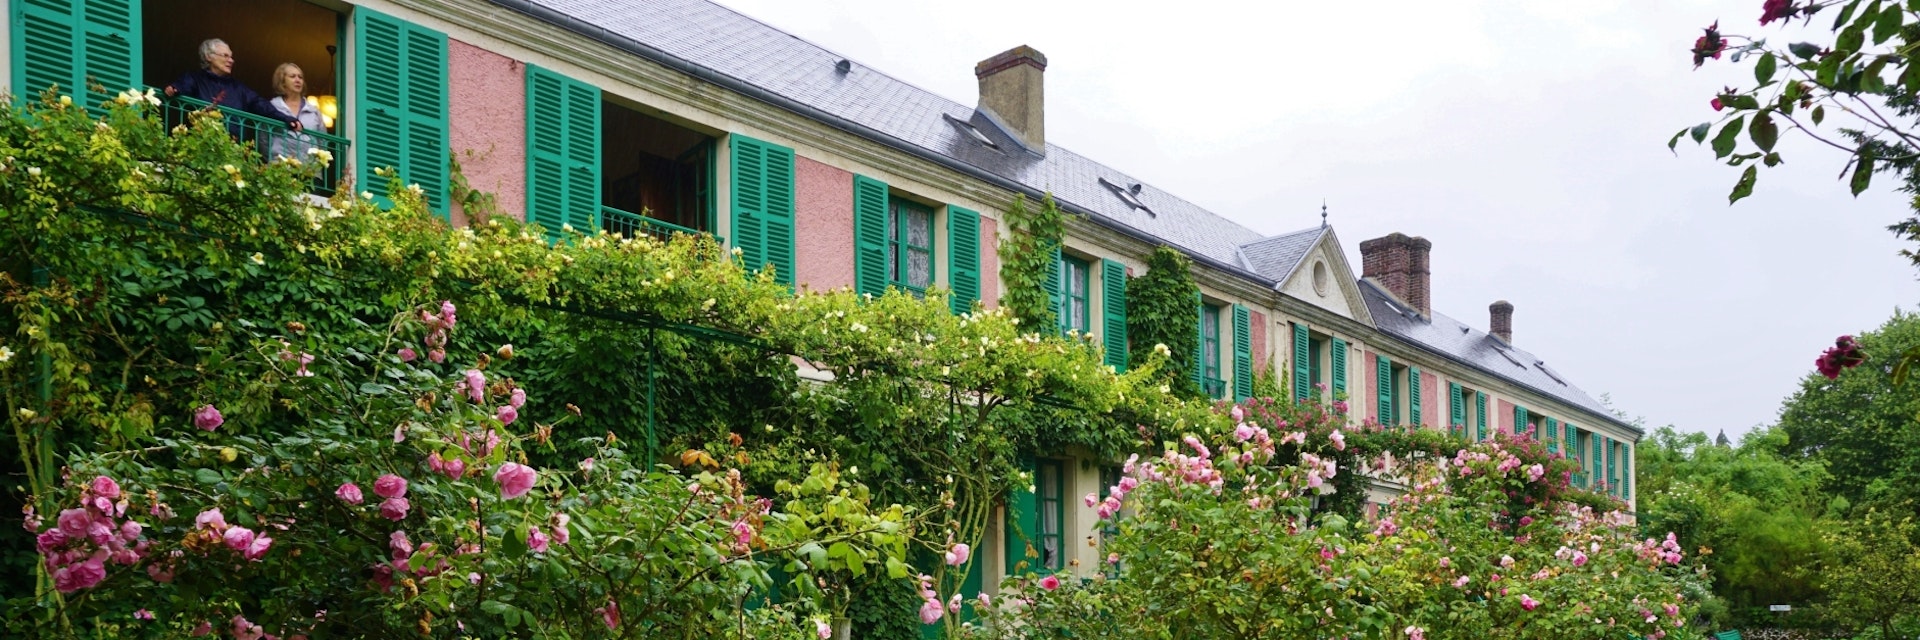 GIVERNY, FRANCE -3 JULY 2016- The house of French impressionist painter Claude Monet in Giverny is now a museum. It includes a beautiful garden with a nymphea waterlily pond and Japanese bridge.; Shutterstock ID 649707625; Your name (First / Last): Daniel Fahey; GL account no.: 65050; Netsuite department name: Online Editorial; Full Product or Project name including edition: Maison et Jardins de Claude Monet POI